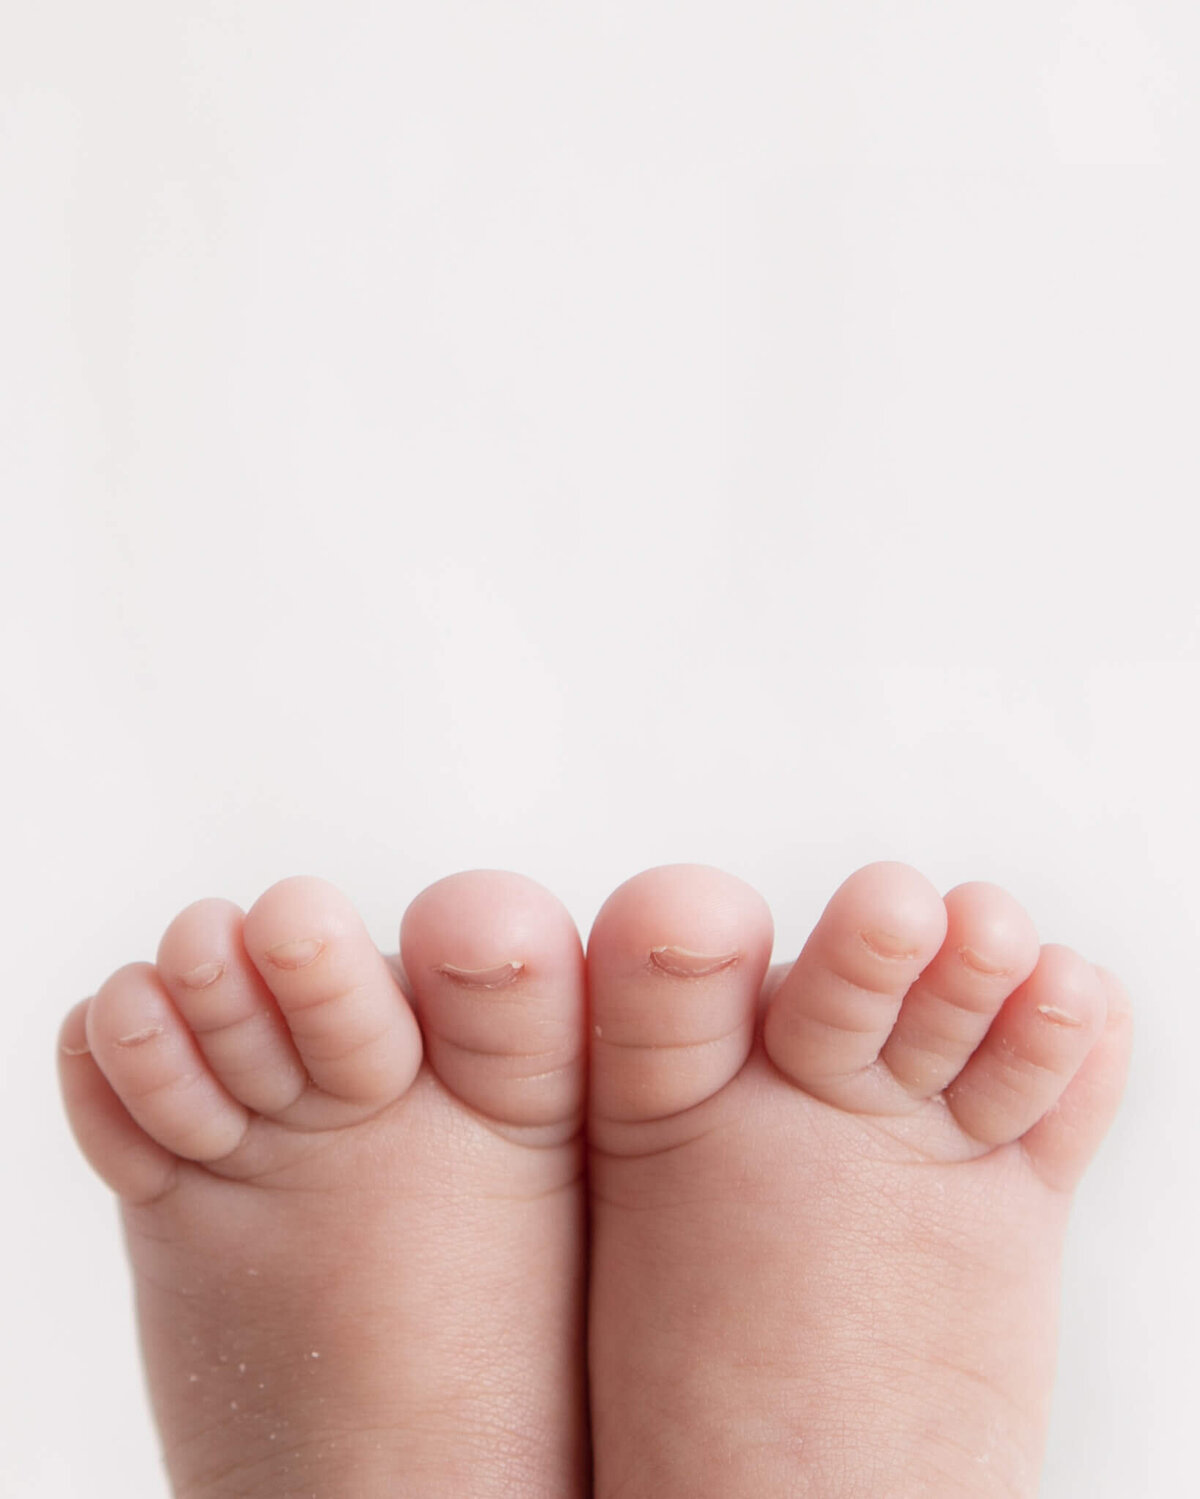 Newborn feet photographed by baby photographer Elsie Rose Photography in Los Angeles